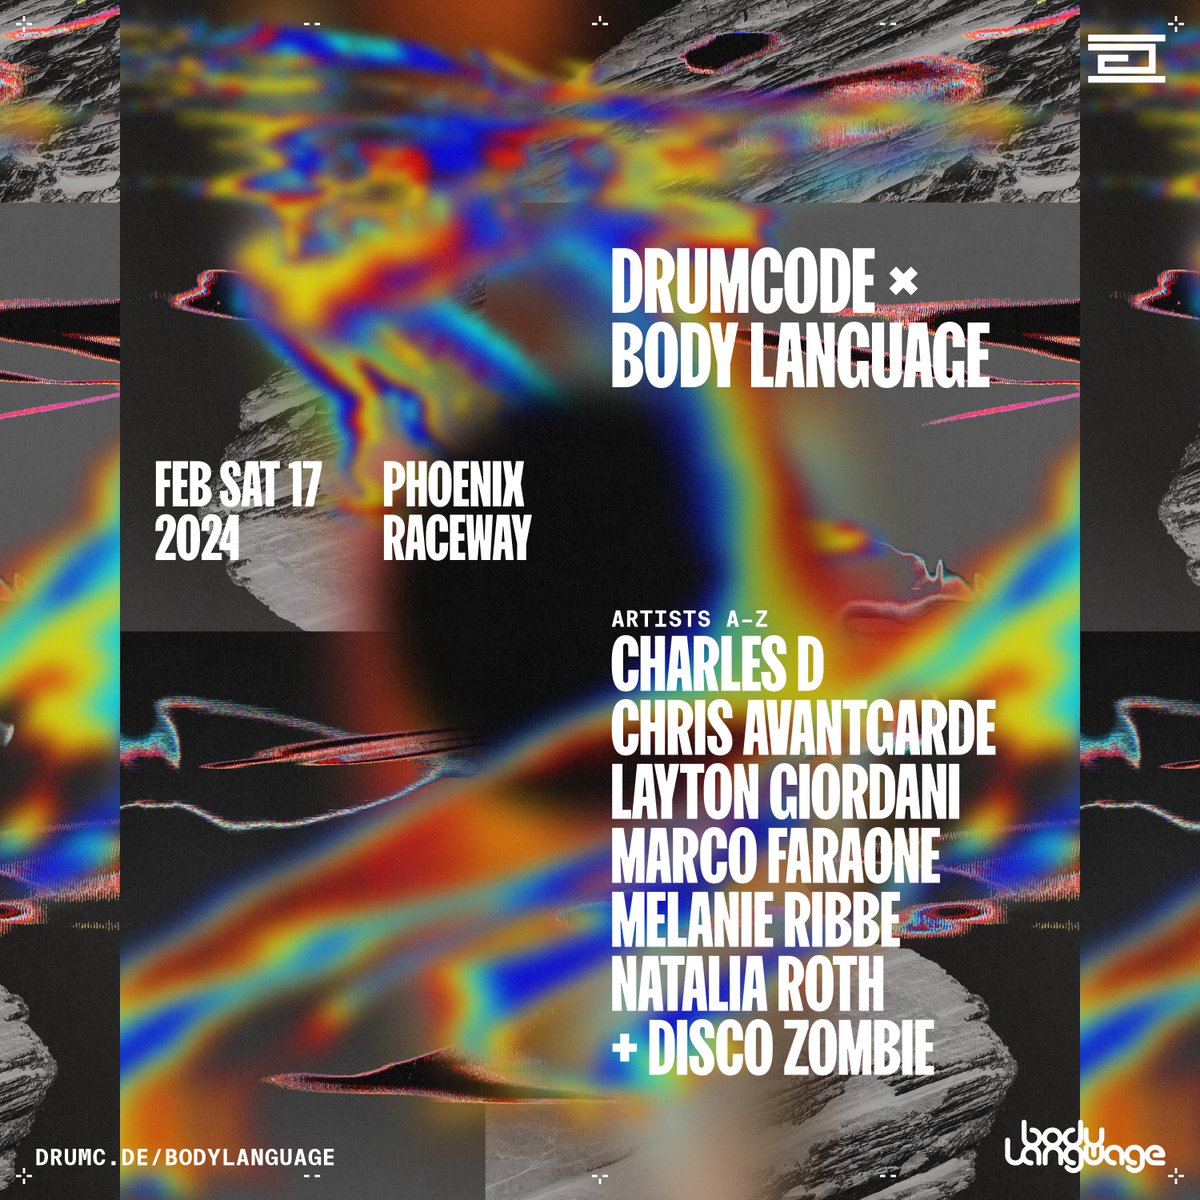 Phase 2 for Body Language is here and it is spicy 🌶️🥵 Also peep the lineup by day! Retweet + tag 3 friends and say PRICES INCREASE SUNDAY! Single day tickets on sale Thursday, Jan 18 at 10am MT All ticket prices increase Sunday at midnight!